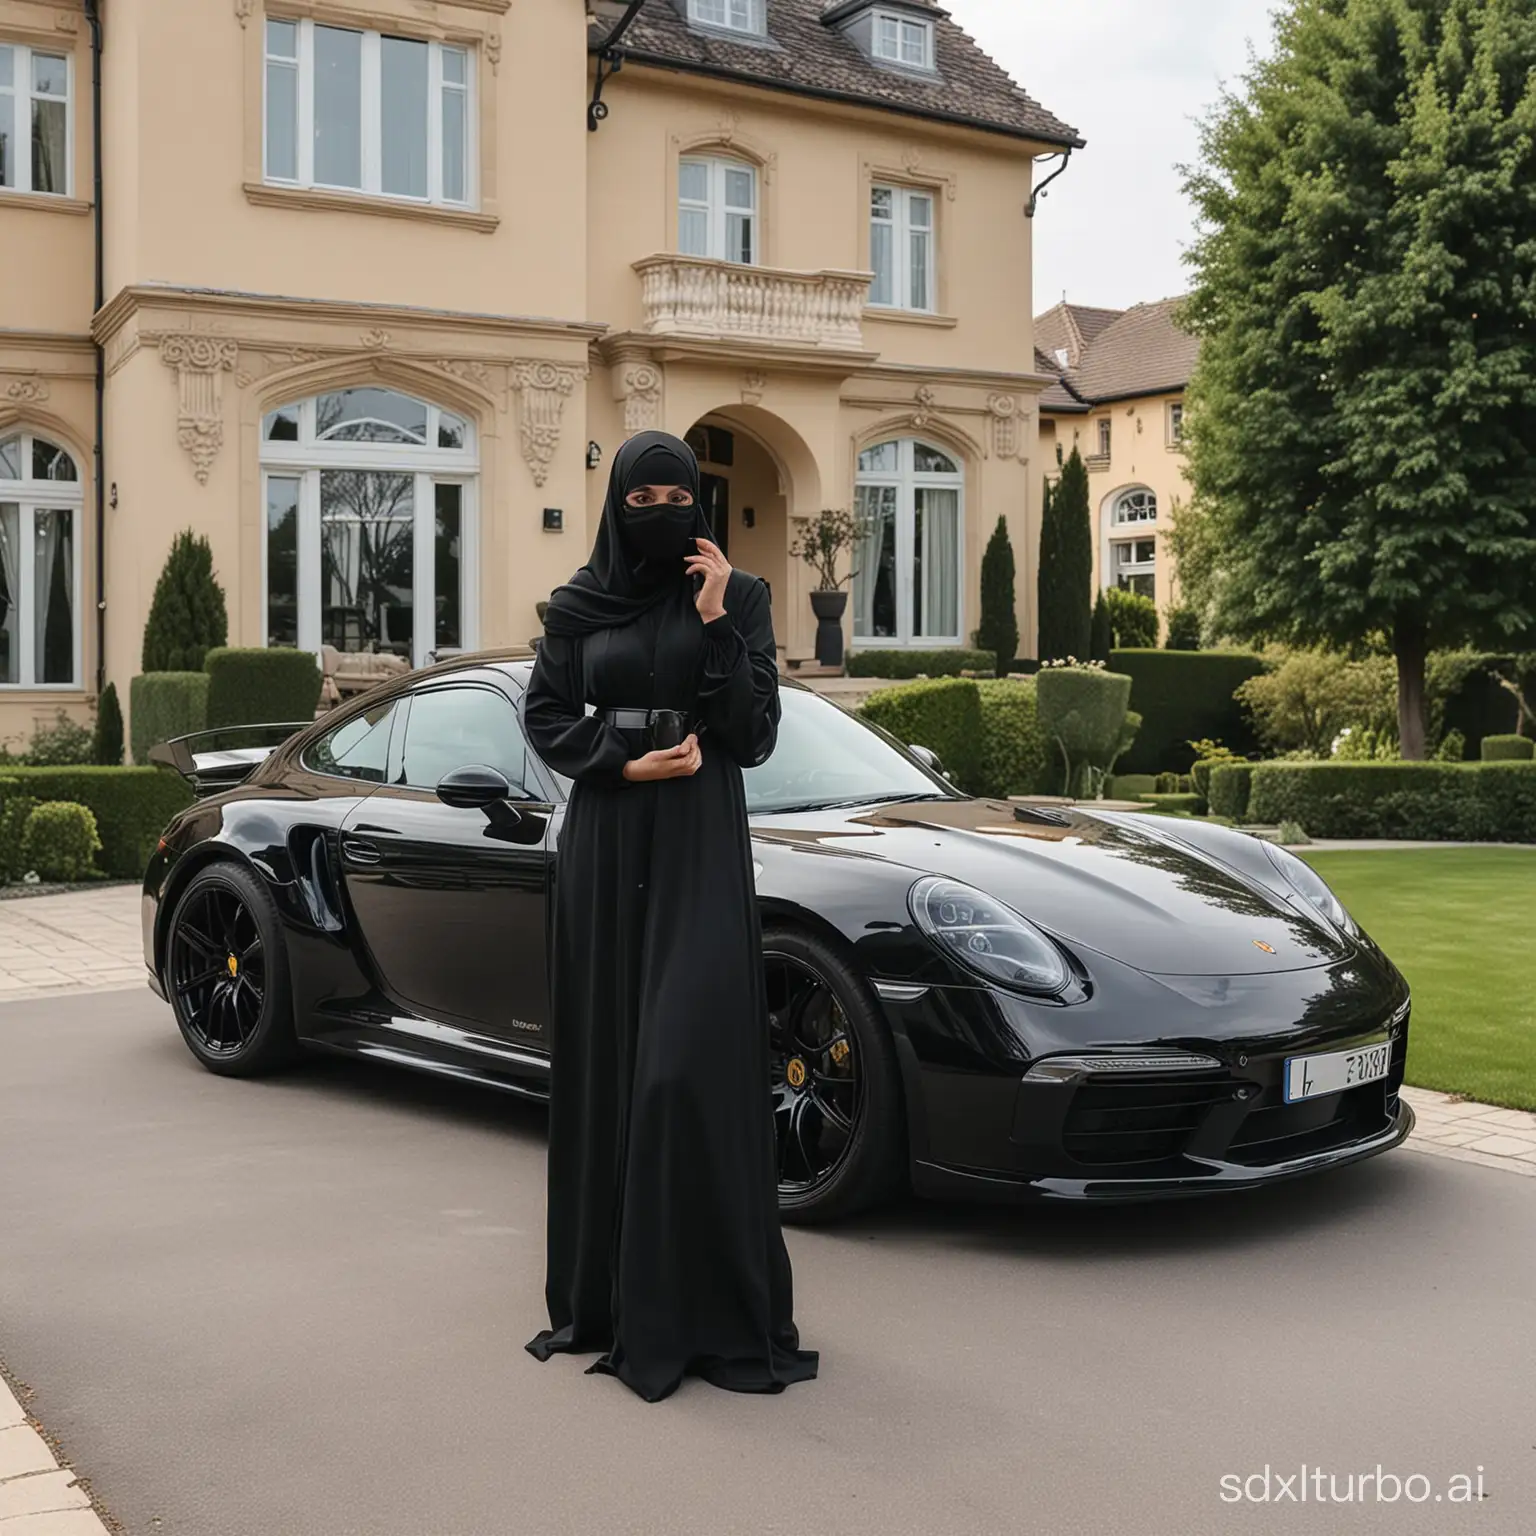 Sissy standing, full black abaya, full black niqab, mouth masked.
Outdoors facing luxury house with black Porsche 911.